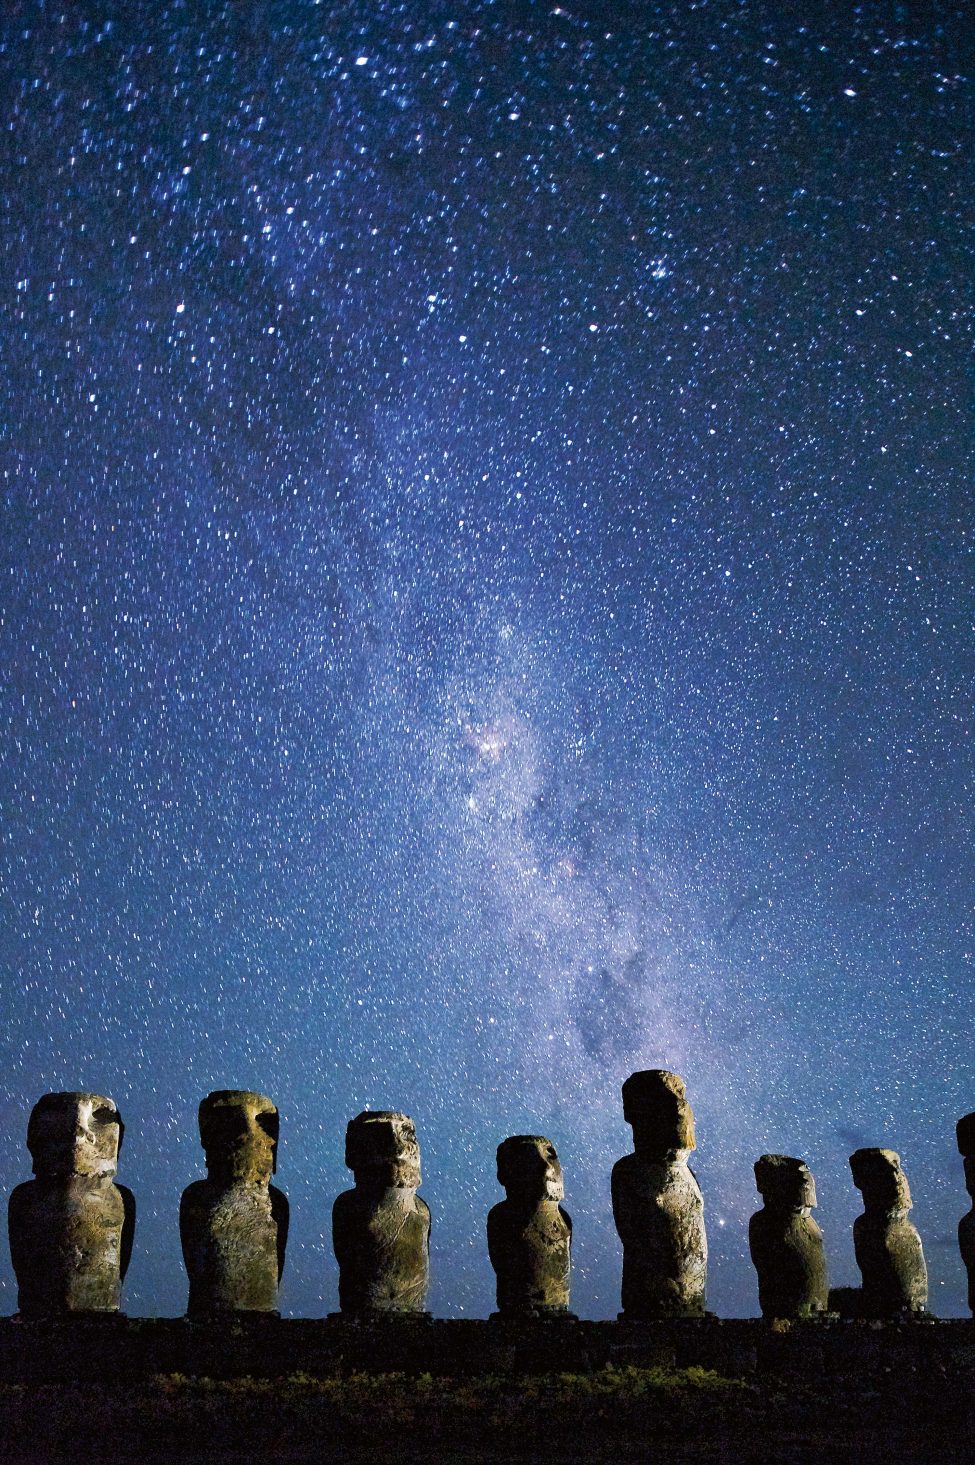 The ancient Polynesian mariners who first colonised Rapa Nui were celestial navigators, forging a route across the Pacific guided by the stars that light the night skies. Today, international flights and modern seafaring make Rapa Nui infinitely more reachable, but the region remains a challenging place for scientists to work in.<br />
Photo by Jim Richardson | National Geographic Creative